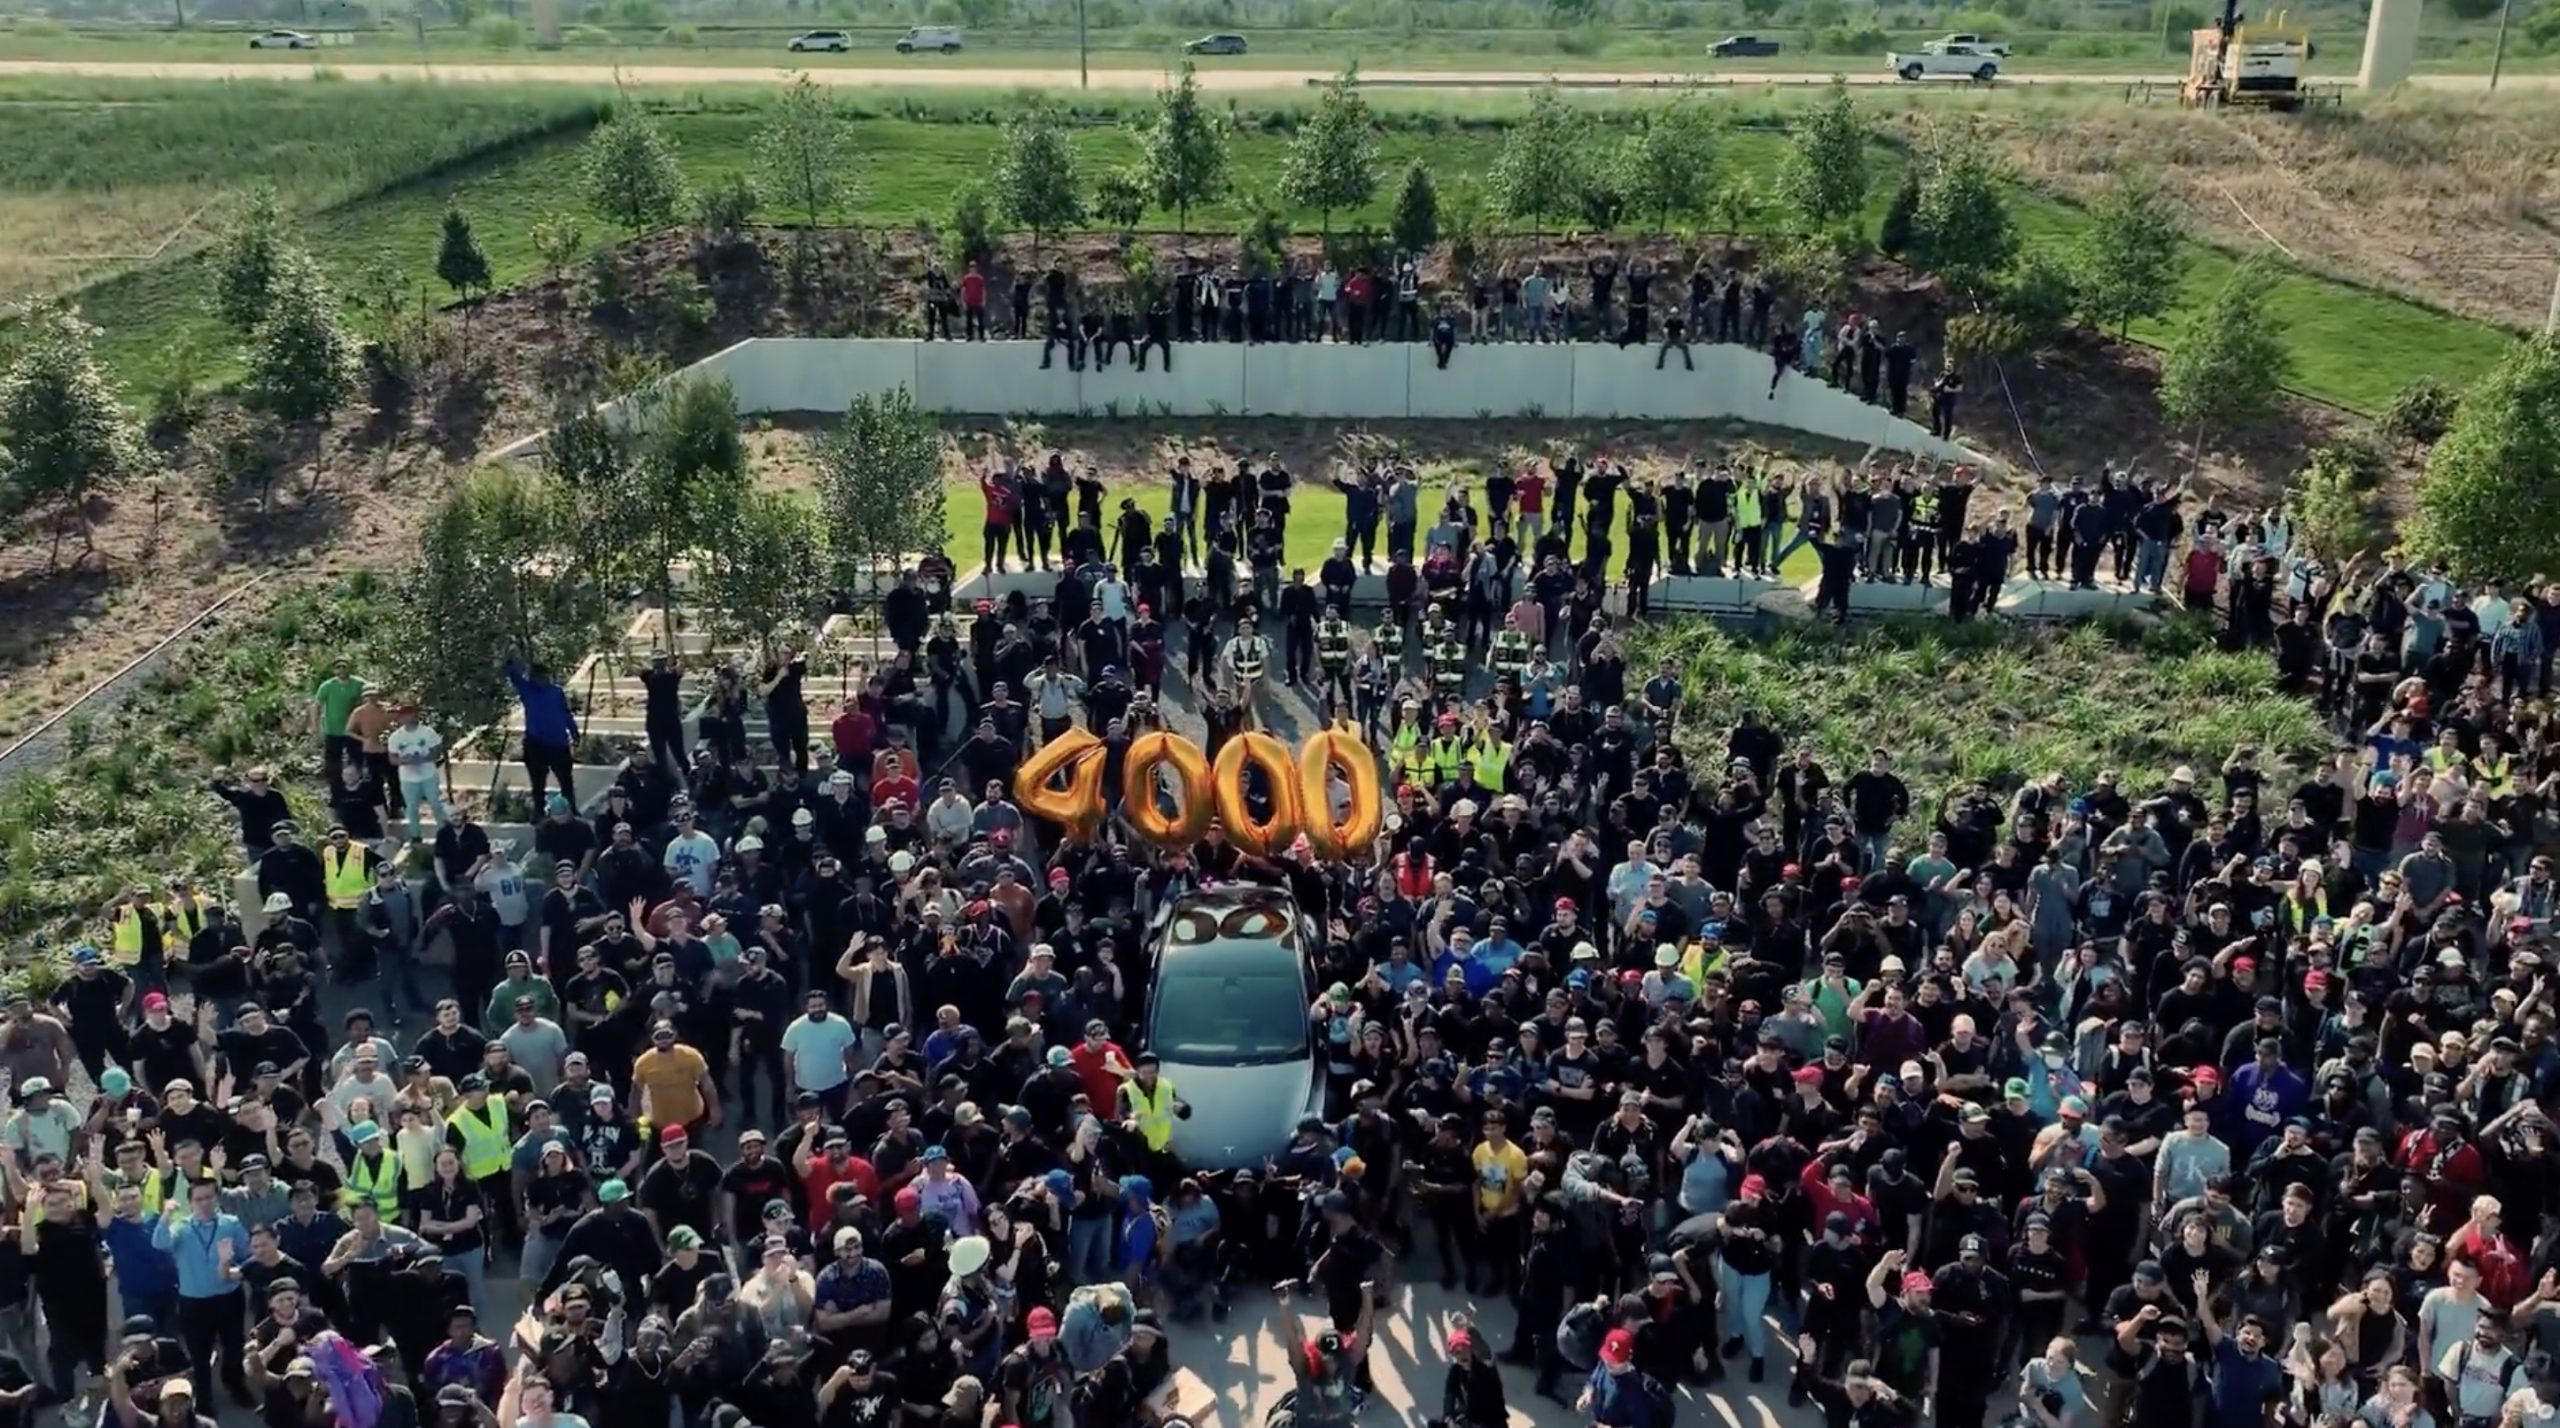 Tesla Giga Texas hits new milestone with 4000 Model Y production in one week